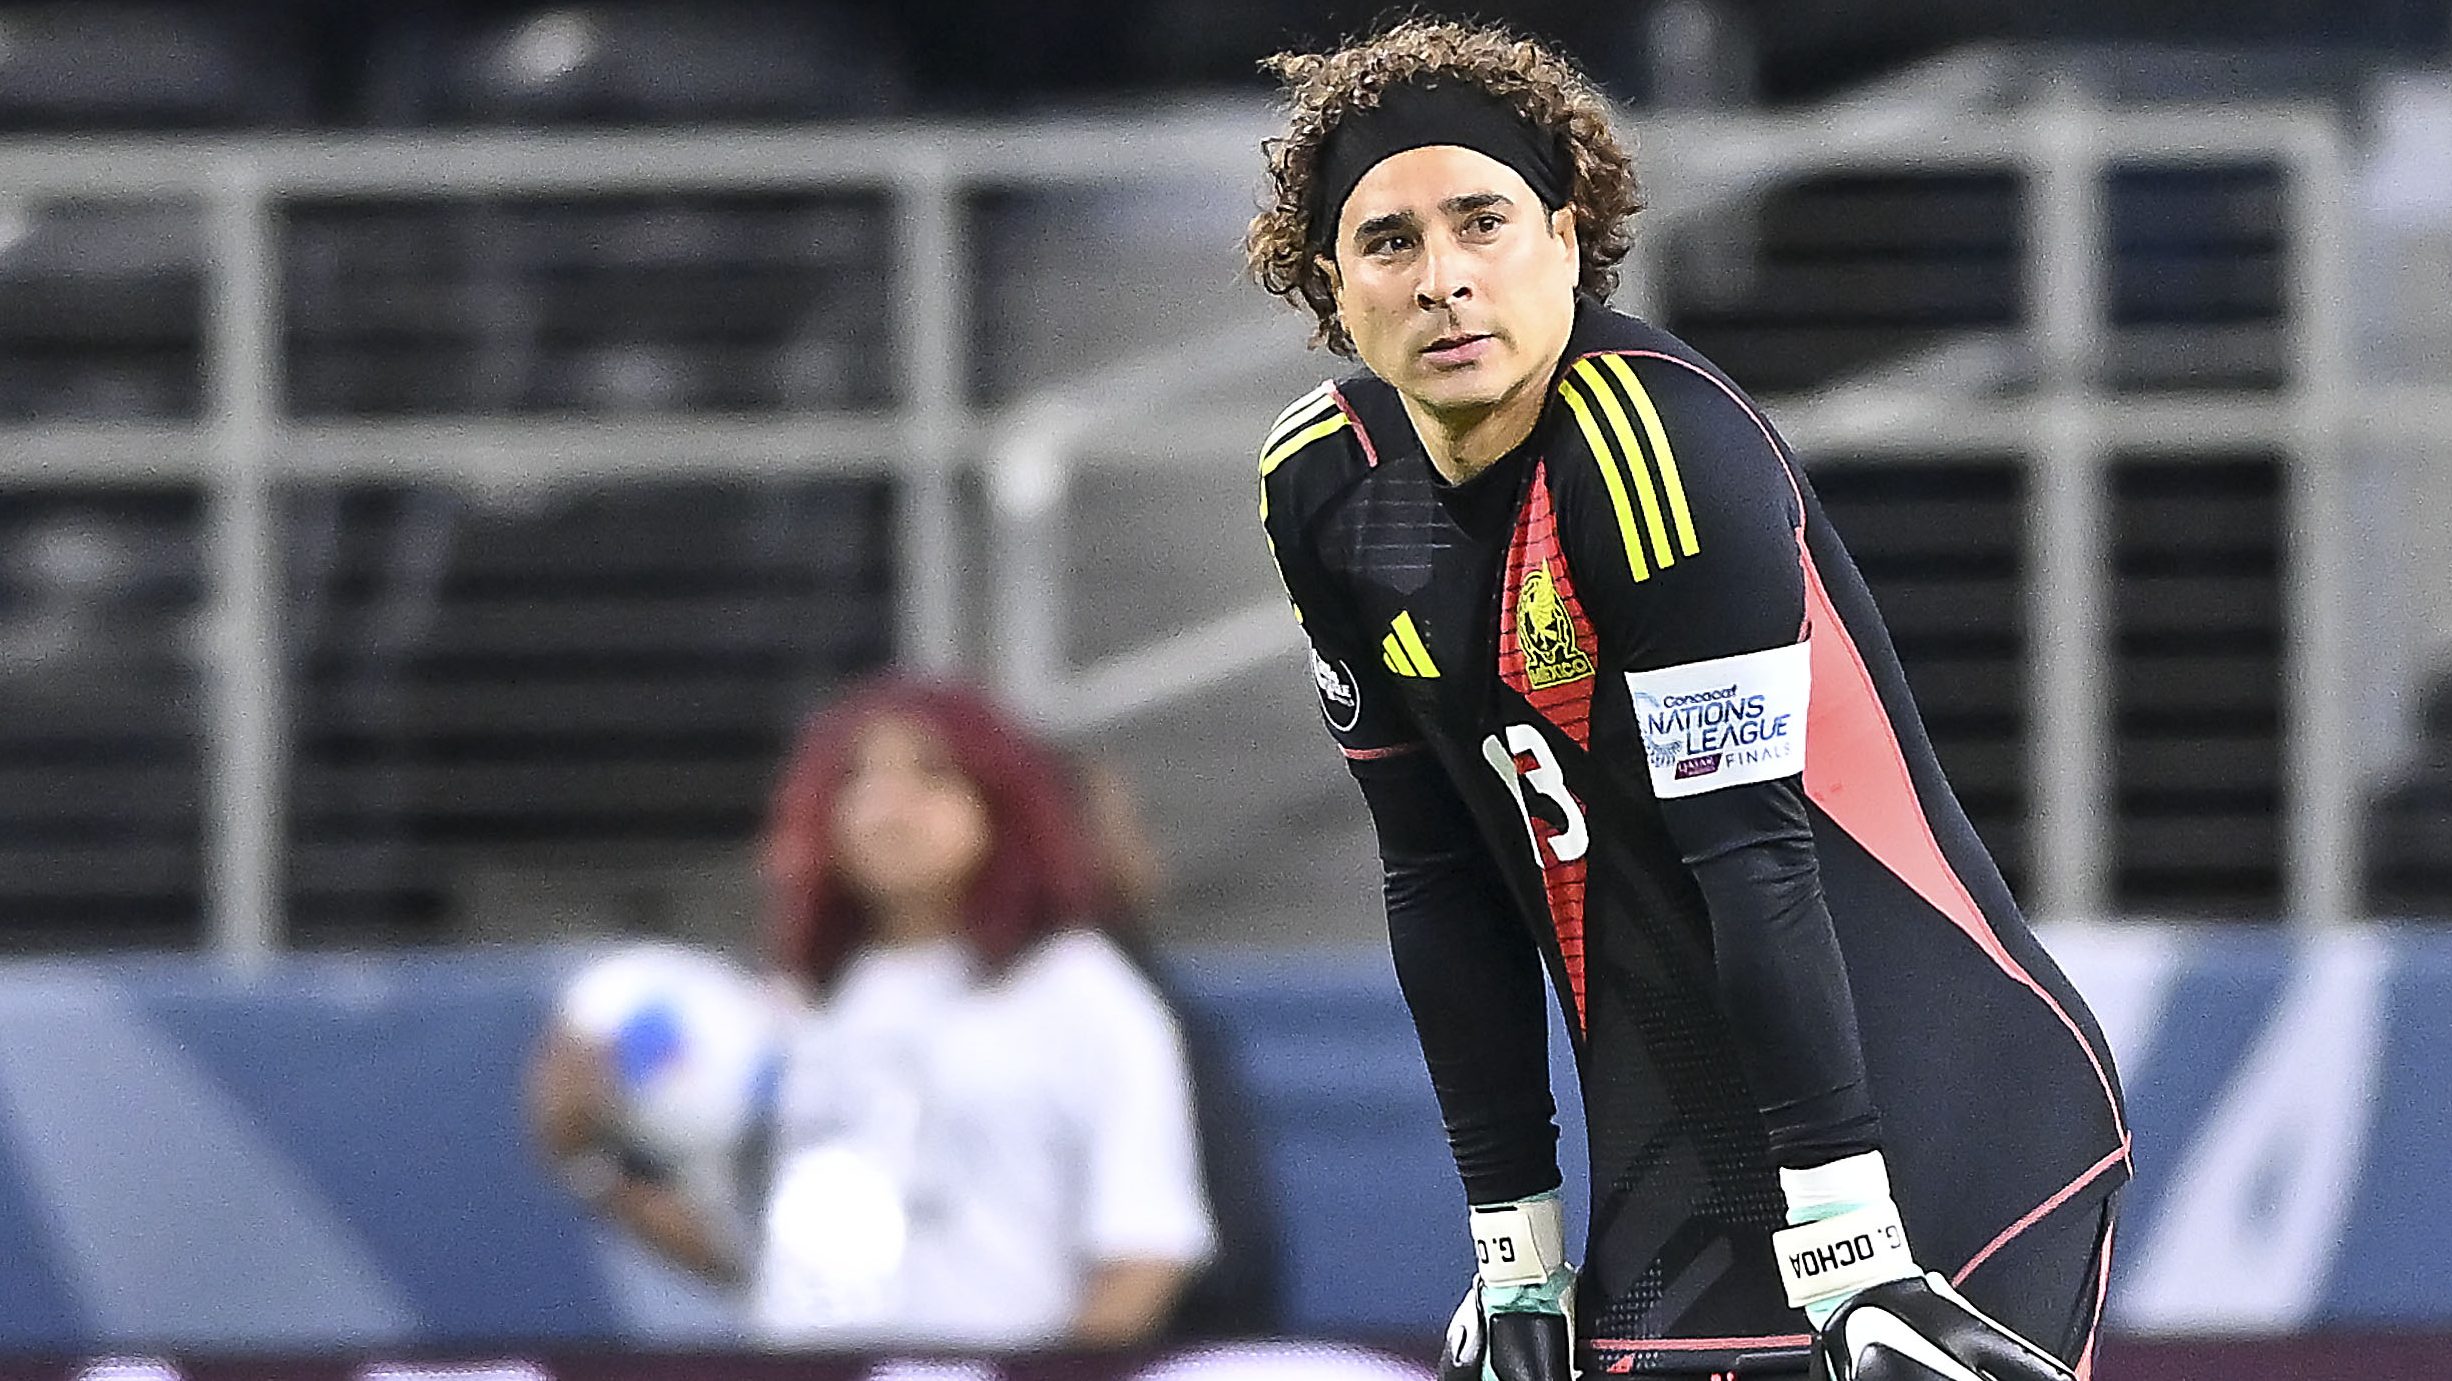 guillermo-ochoa-is-relegated-again-and-the-memes-made-fun-of-this-hard-blow-in-italy